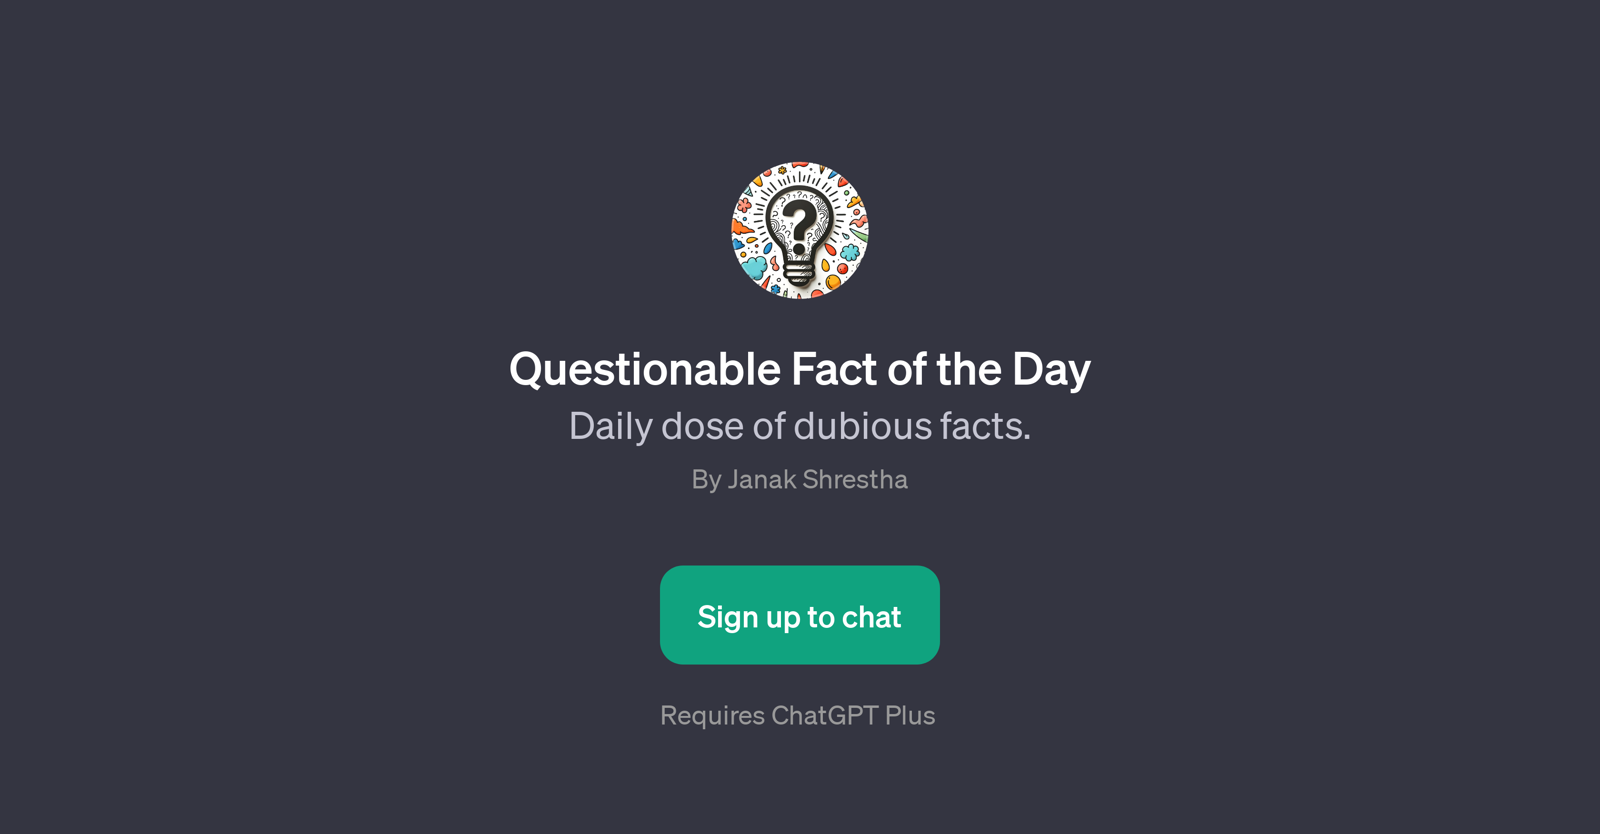 Questionable Fact of the Day website